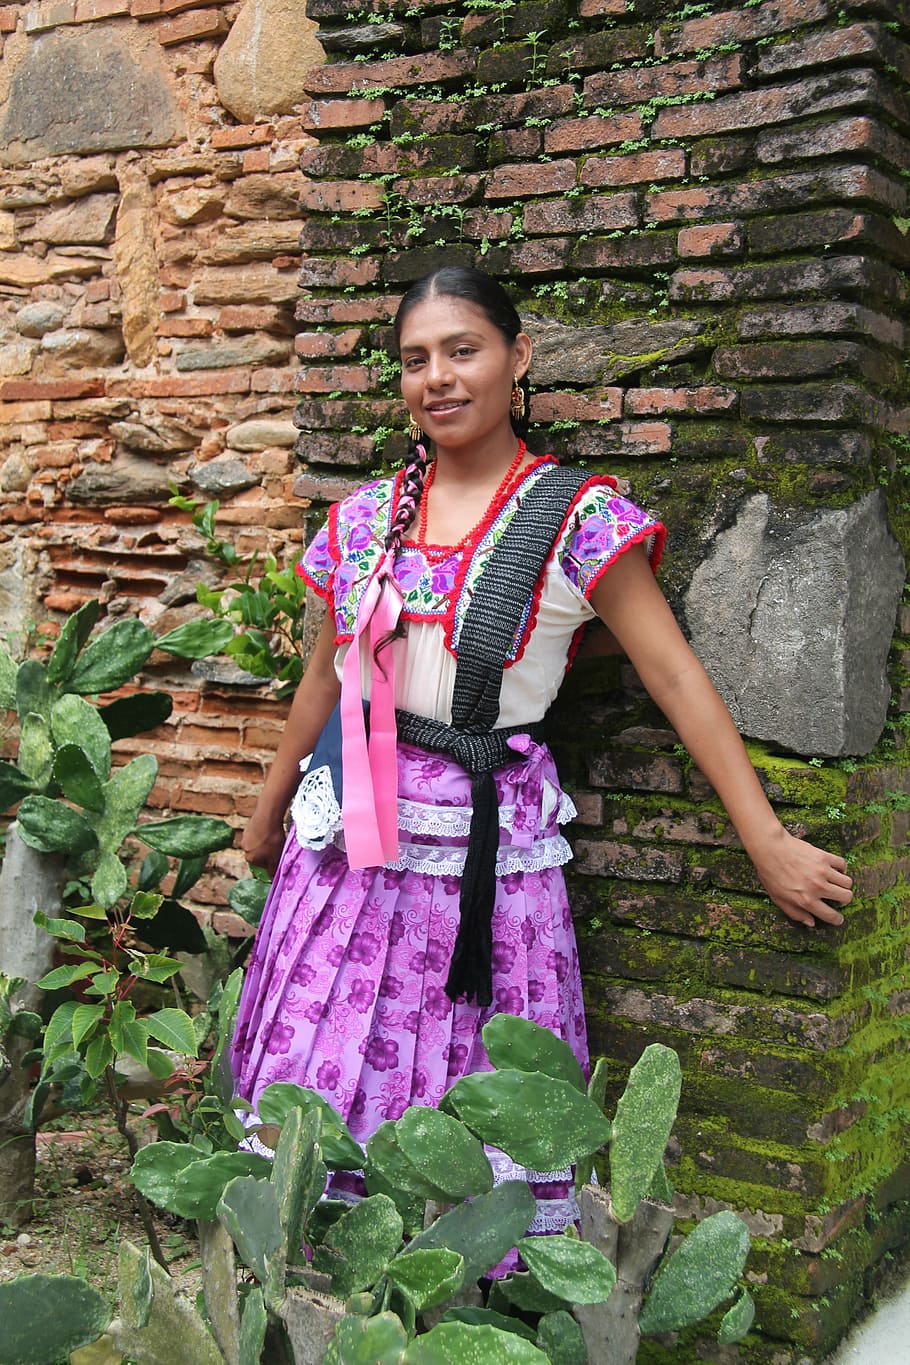 women, cactus, mexican, oaxaca, indigenous, church, chatina, traditional clothes, one person, standing